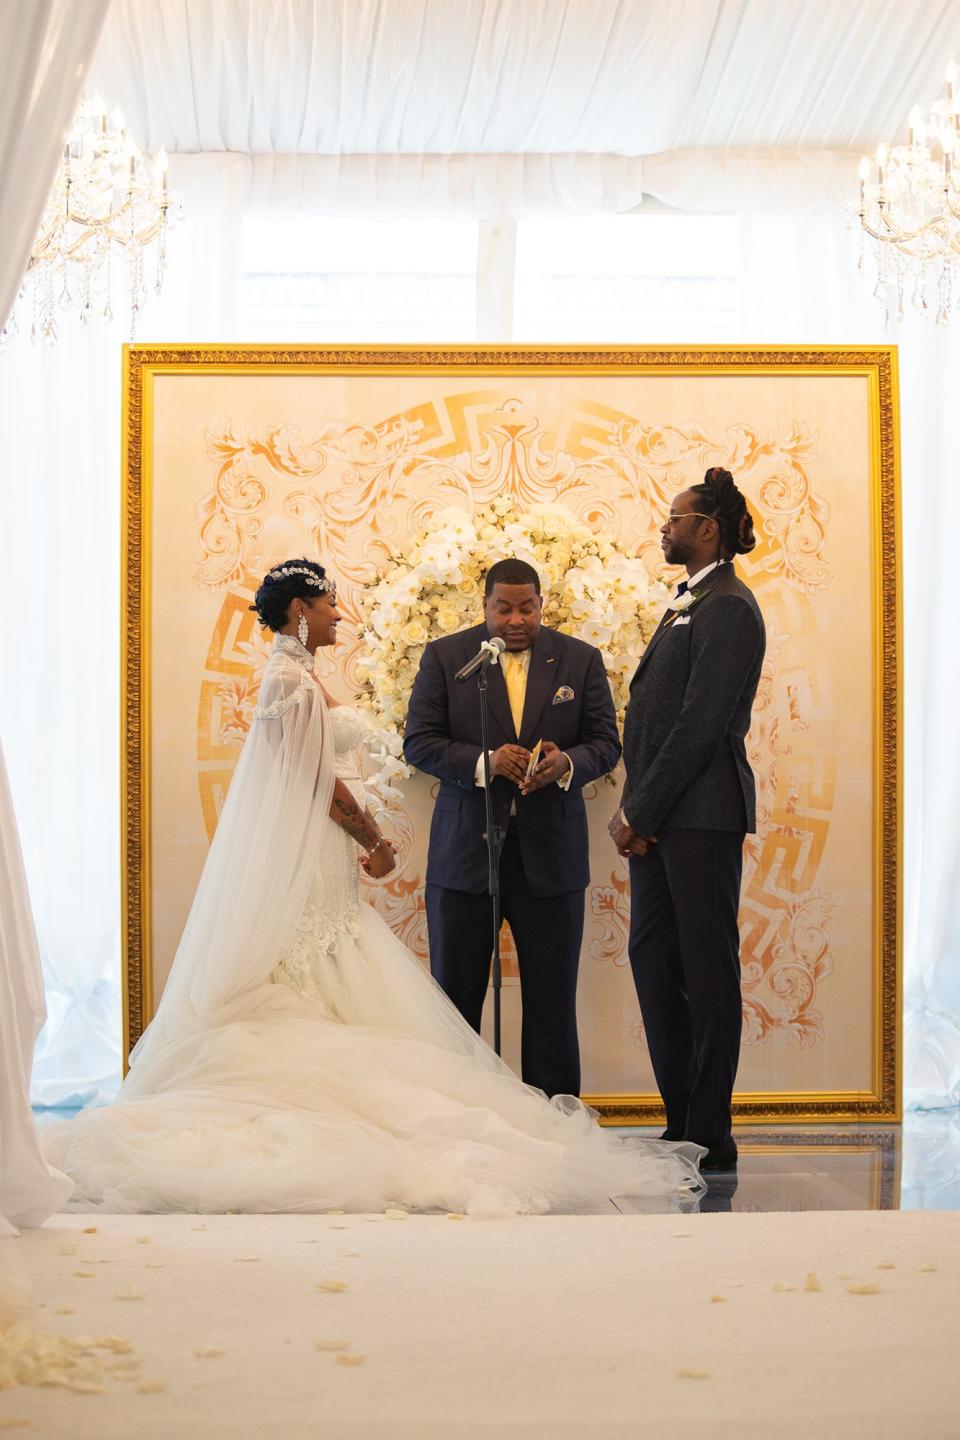 The location was iconic, but the crowd intimate. 2 Chainz even got Lil Wayne to wear a tux.